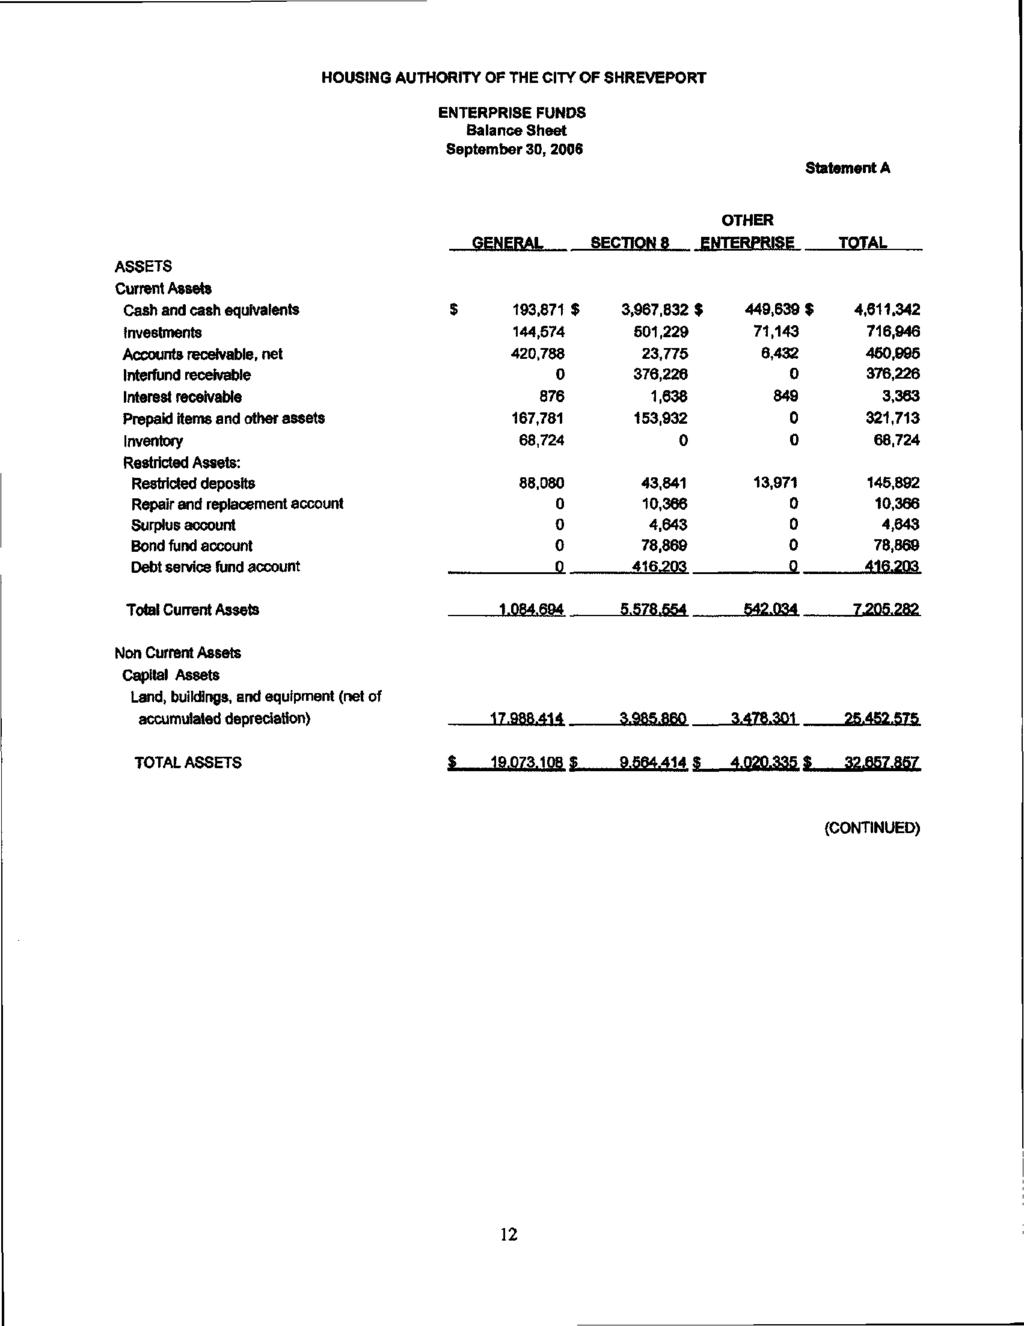 HOUSING AUTHORITY OF THE CITY OF SHREVEPORT ENTERPRISE FUNDS Balance Sheet September 3, 26 Statement A ASSETS Current Assets Cash and cash equivalents Investments Accounts receivable, net Interfund